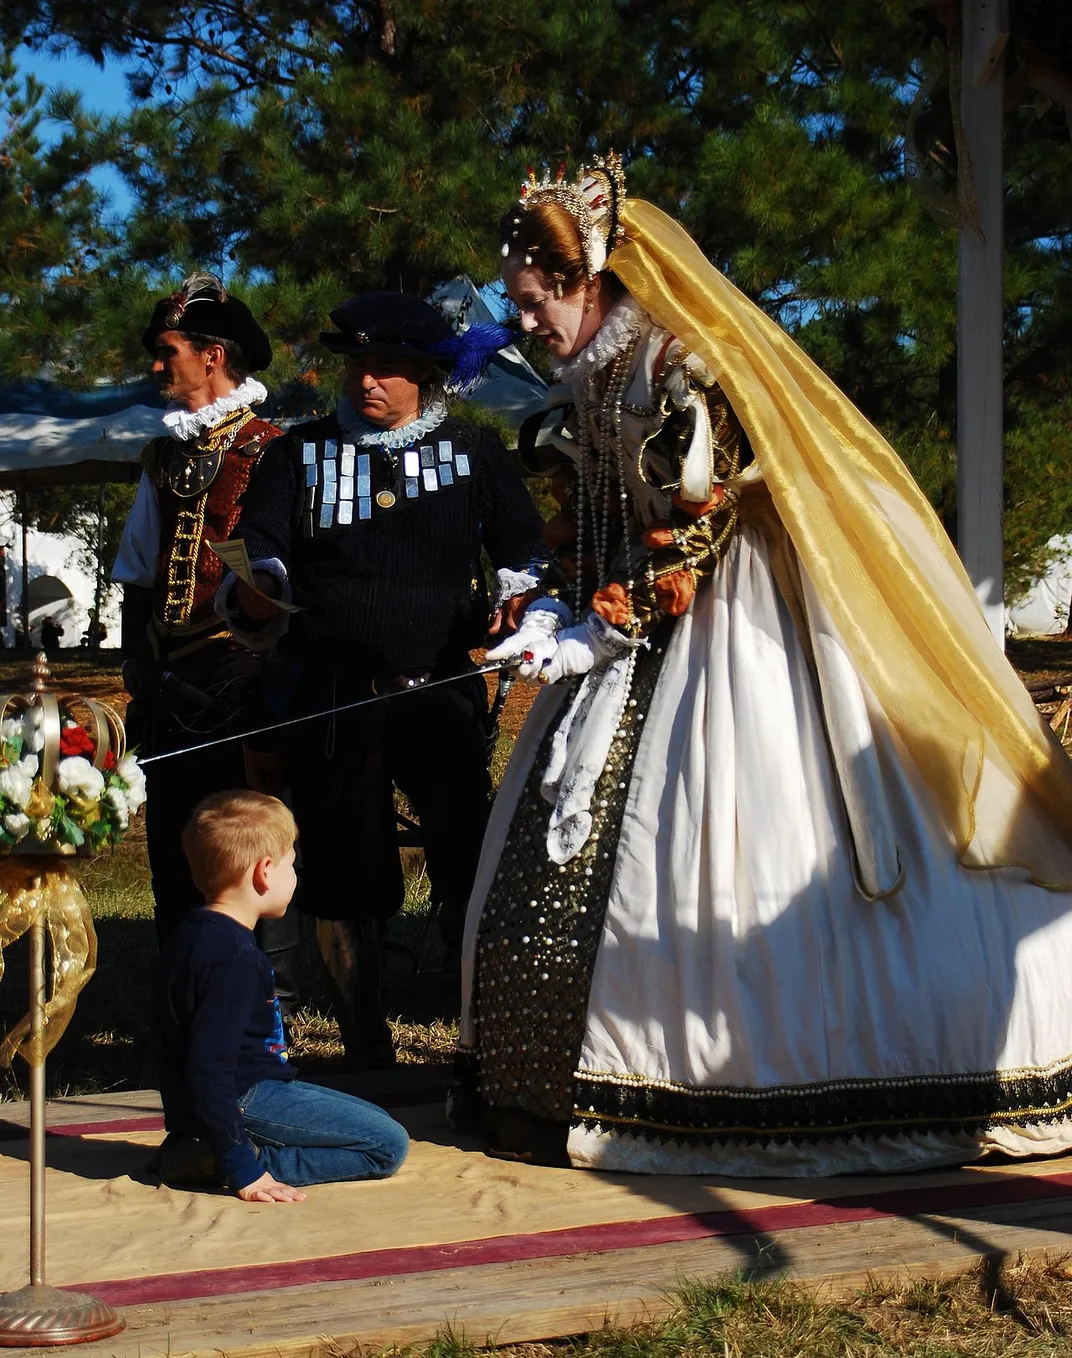 A performer dressed as Elizabeth I knights a visitor at the 2008 Louisiana Renaissance Festival.